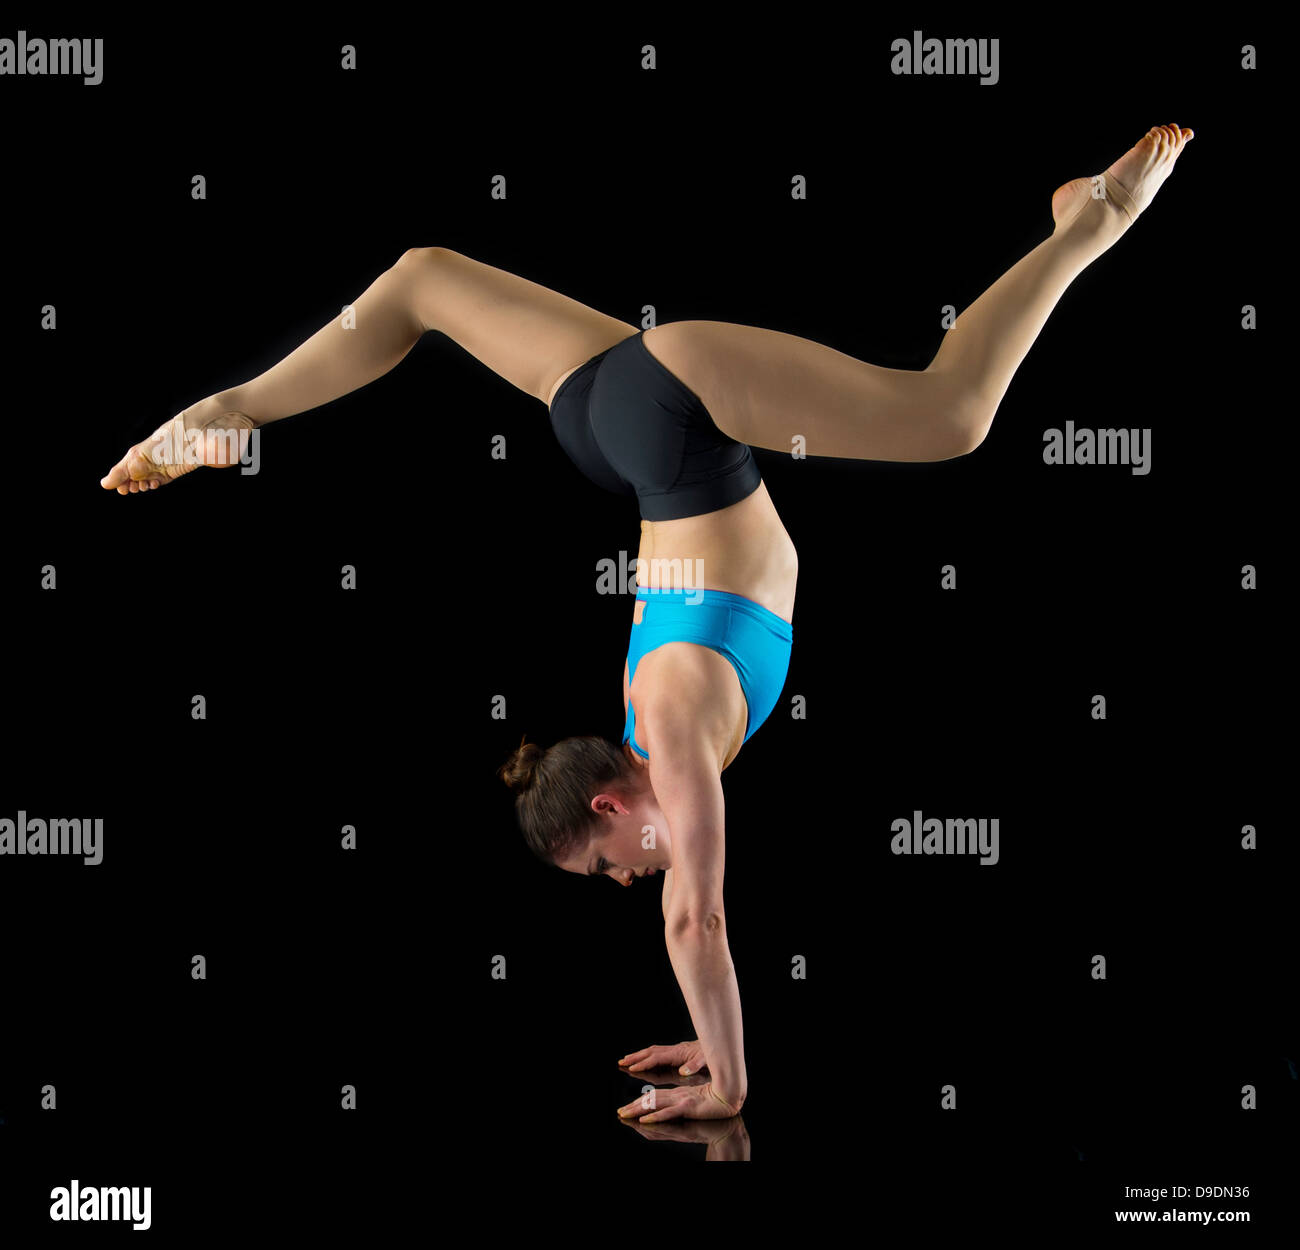 Acrobat performing handstand in front of black background Stock Photo